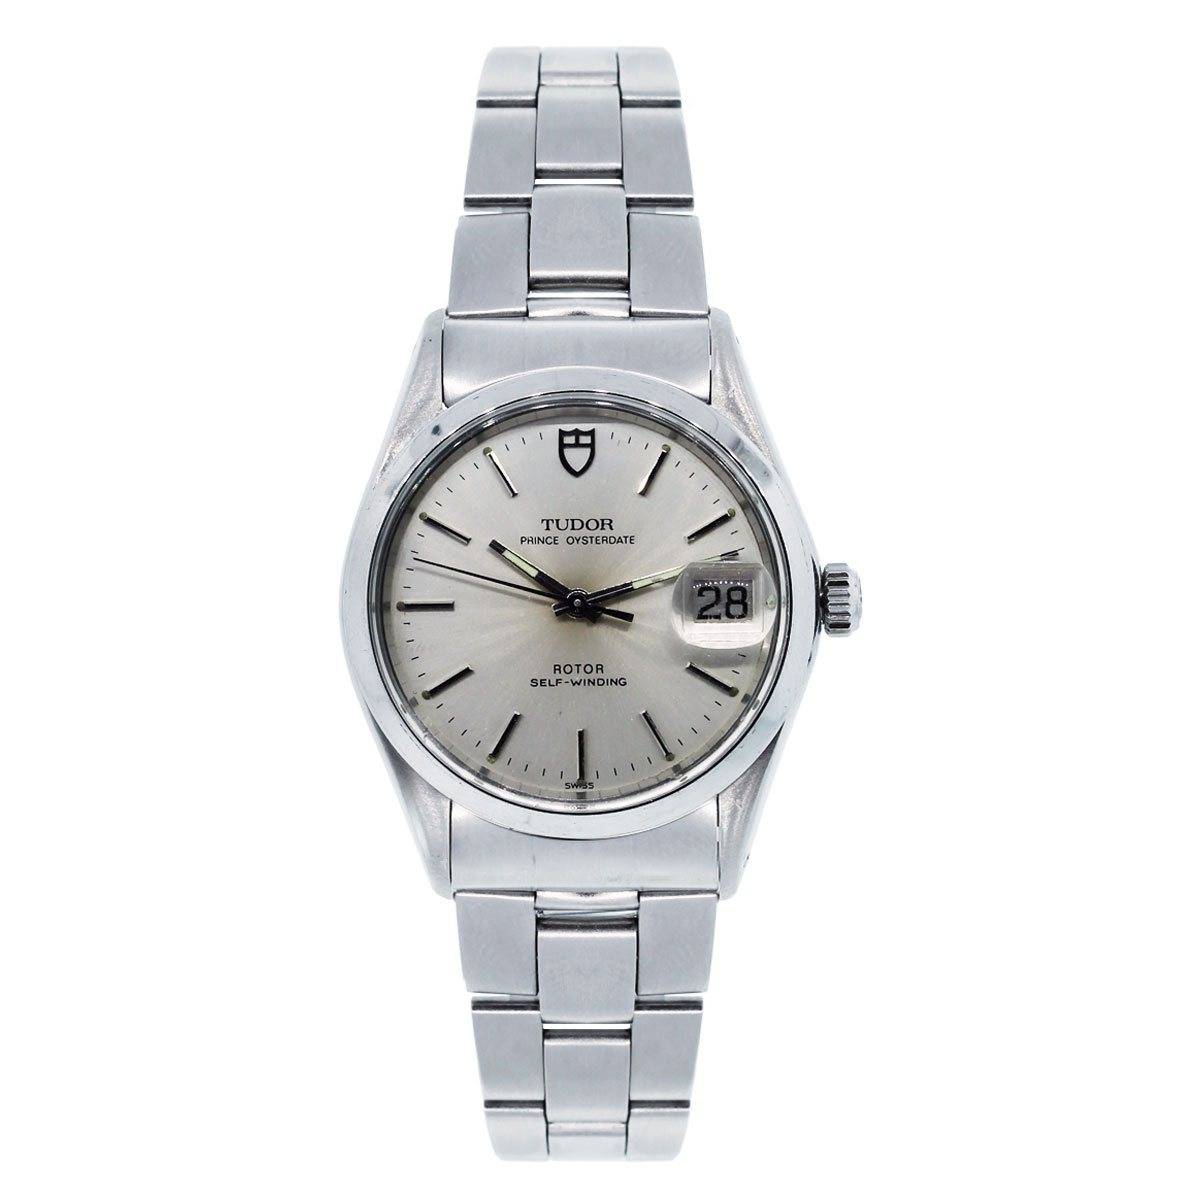 Tudor Prince Oysterdate 16352 Stainless Steel Watch